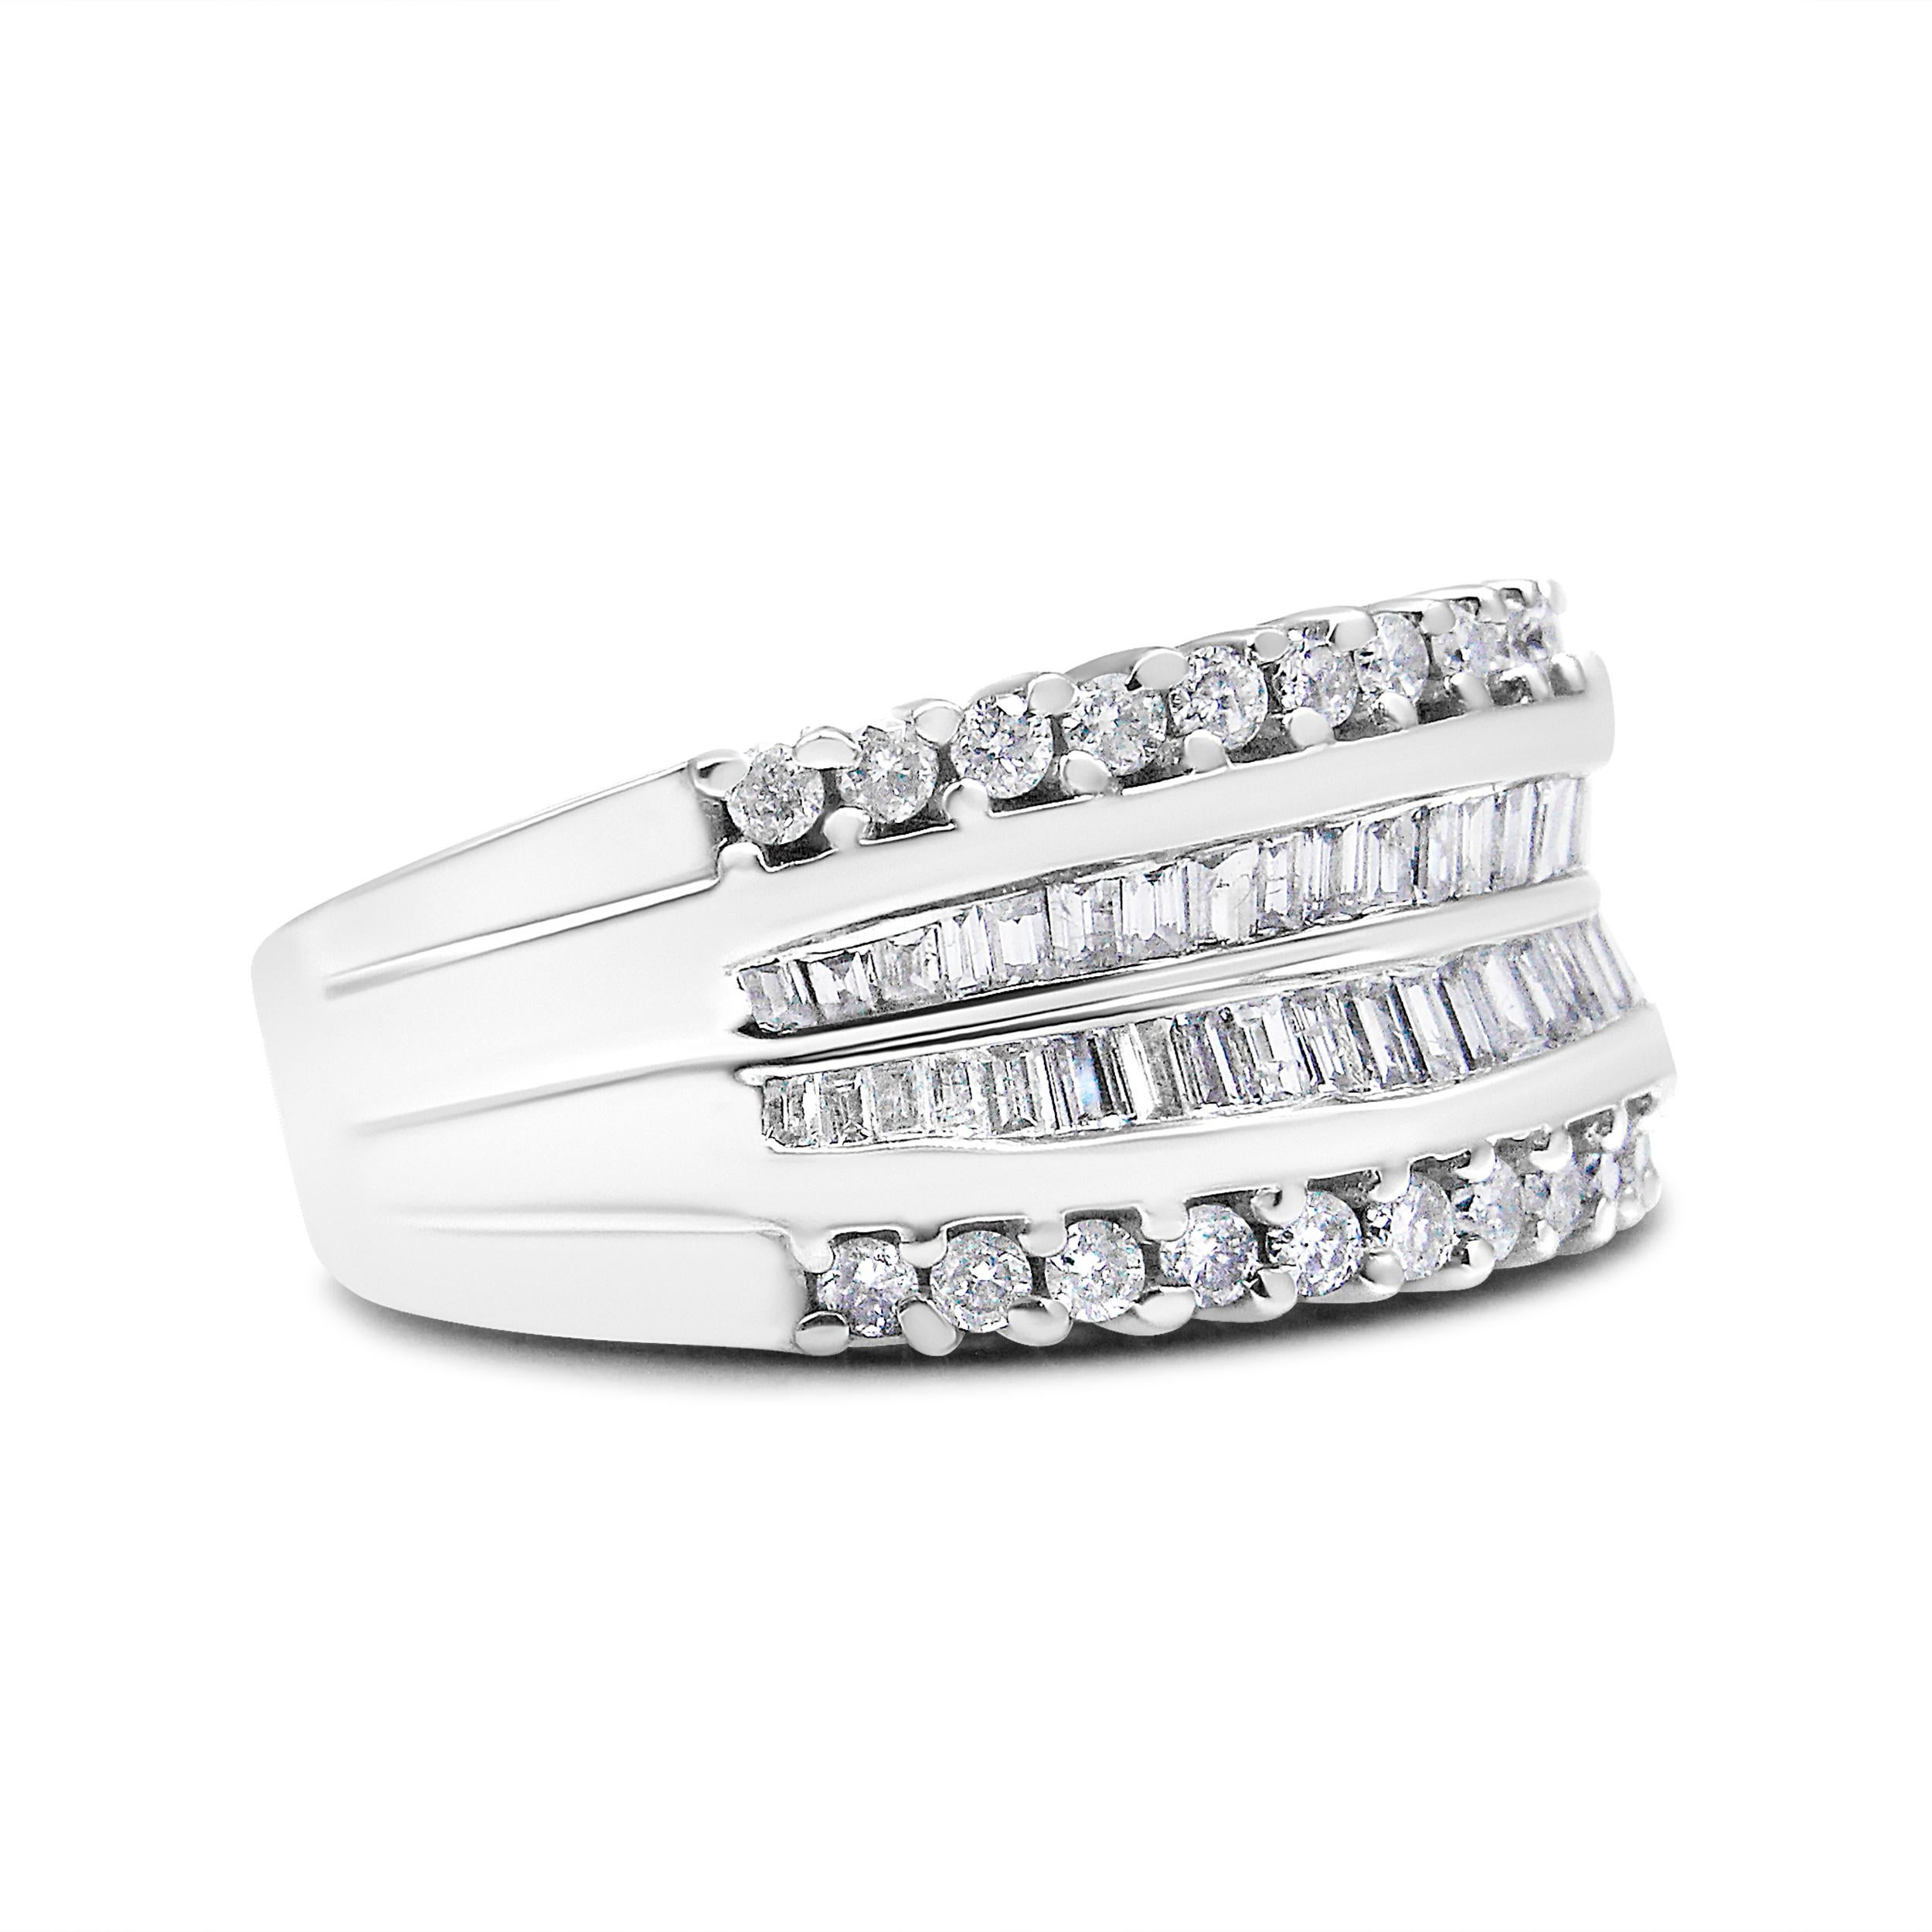 Modern and elegant, this stunning diamond ring has an impressive total diamond weight of 1.00 c.t. This beautiful band is crafted in 14k white gold, a metal that will stay tarnish free for years to come. This piece is designed with two rows of